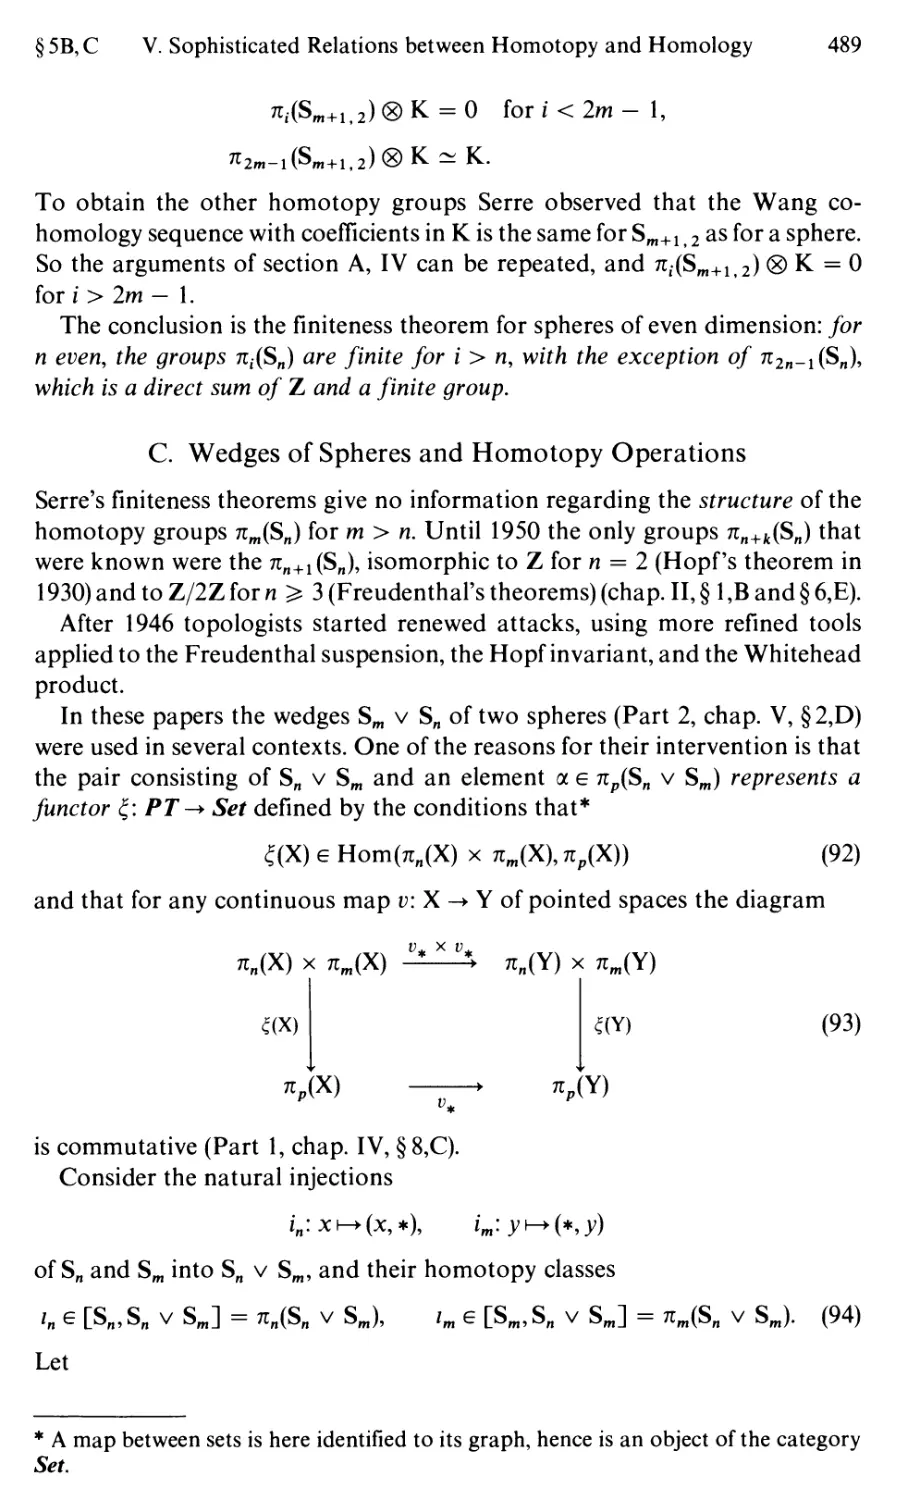 C. Wedges of Spheres and Homotopy Operations